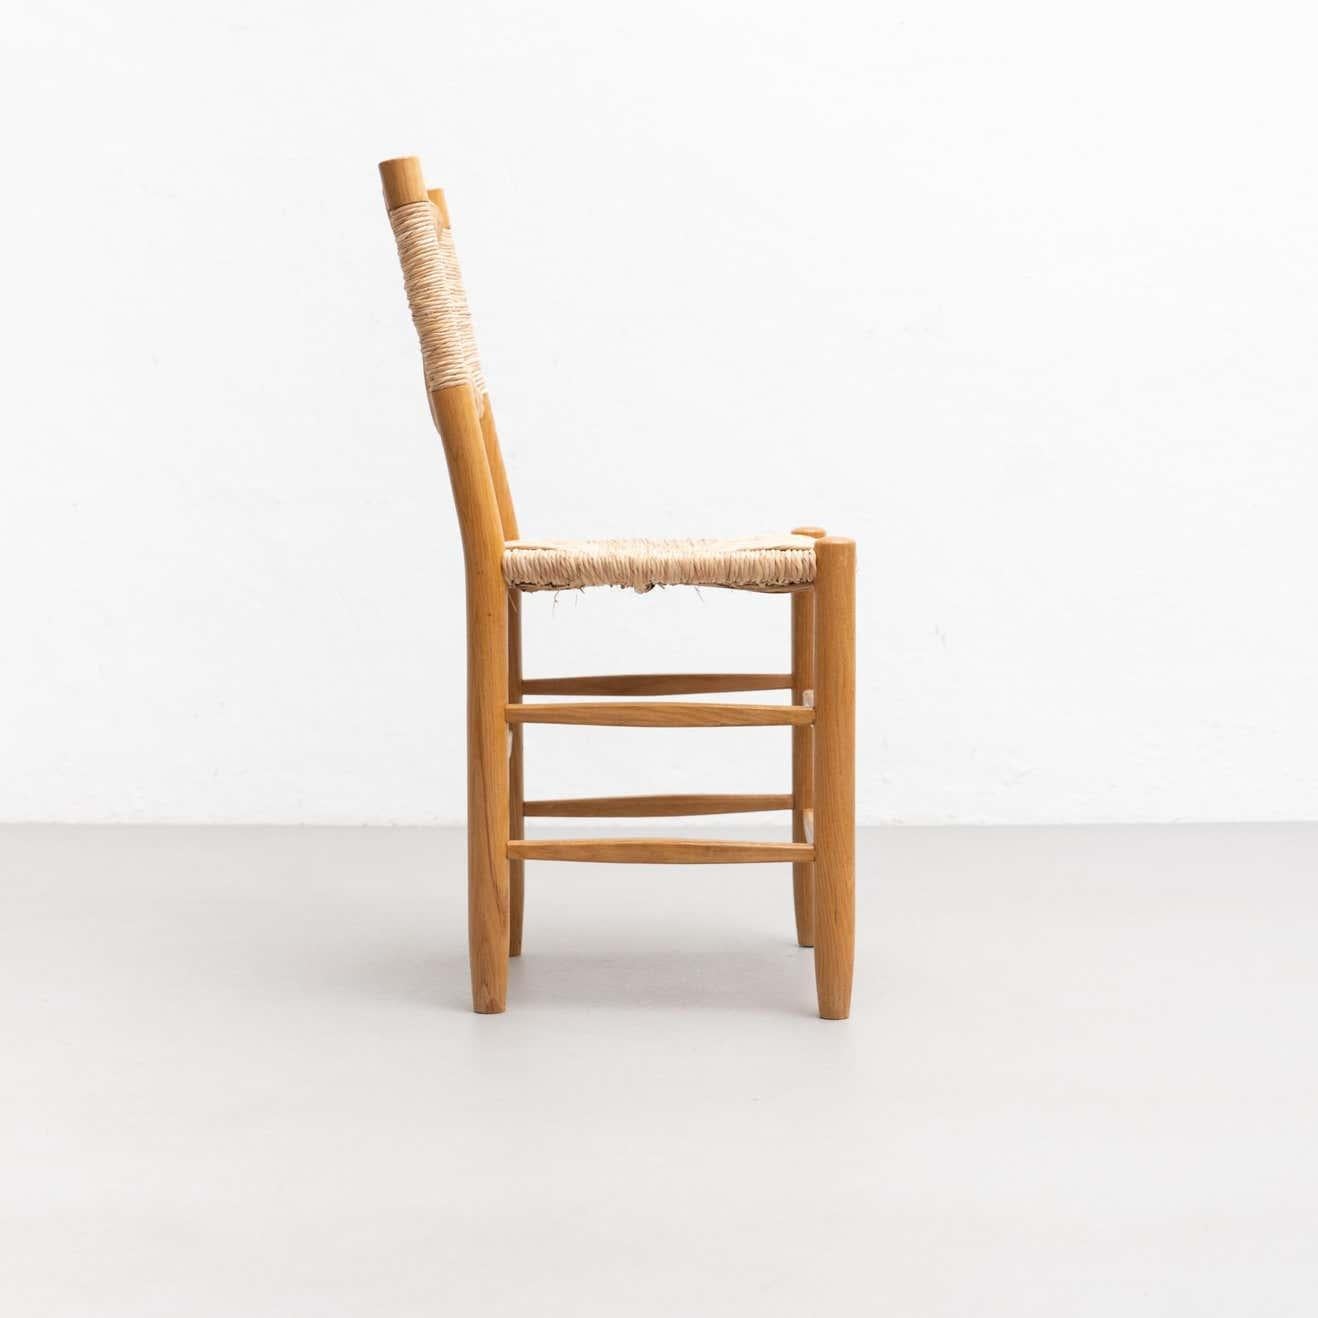 Late 20th Century After Charlotte Perriand N.19 Chair, Wood Rattan, Mid-Century Modern For Sale